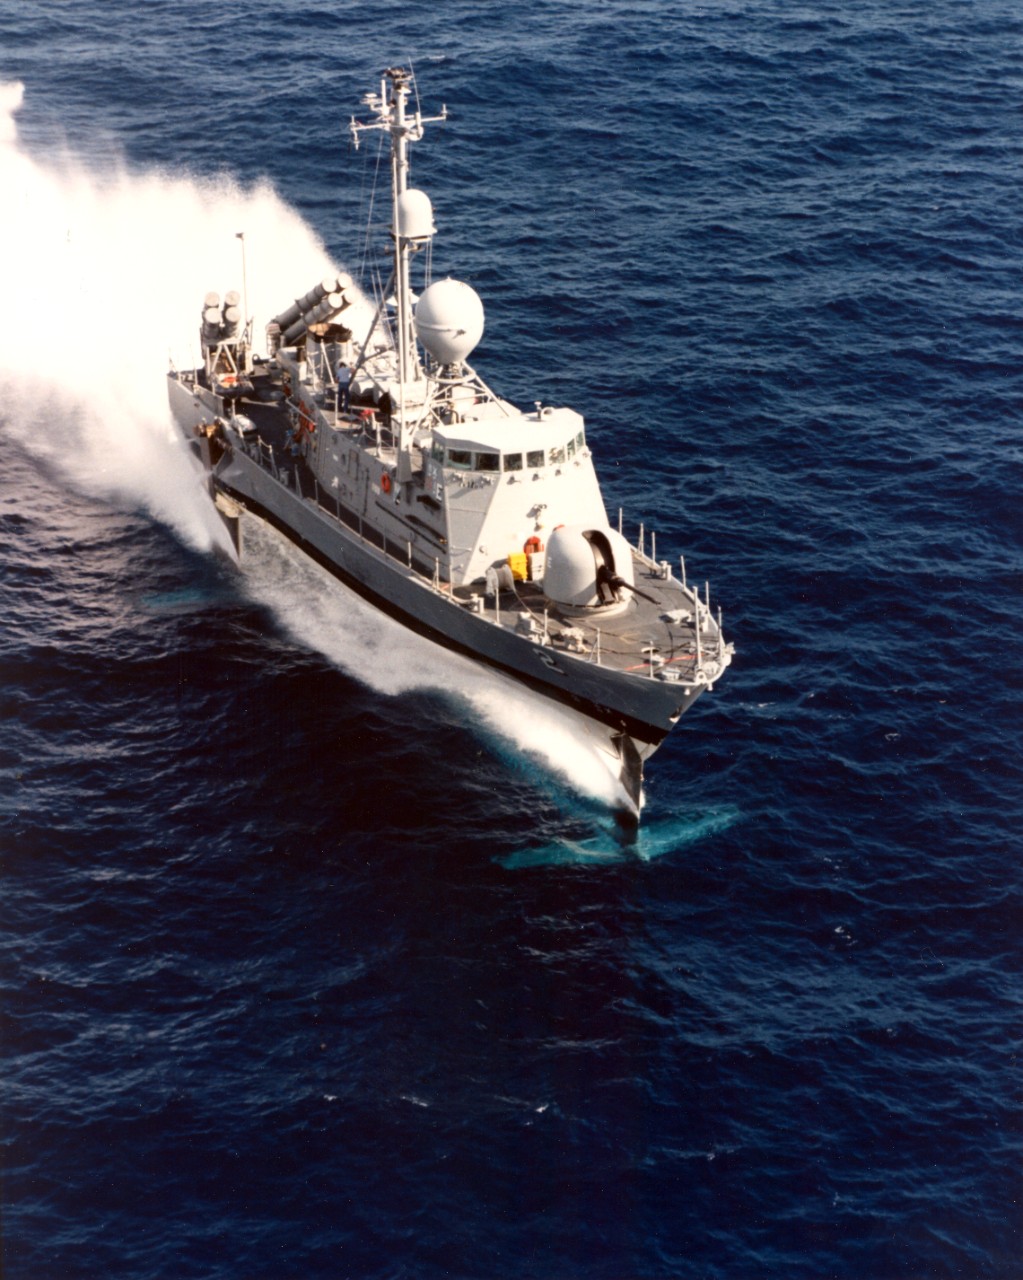 Patrol combatant missile hydrofoil USS Hercules (PHM-2) underway in the Gulf of Mexico, November 1989. Hercules is assigned to PHM Squadron 2, based in Key West, Florida.